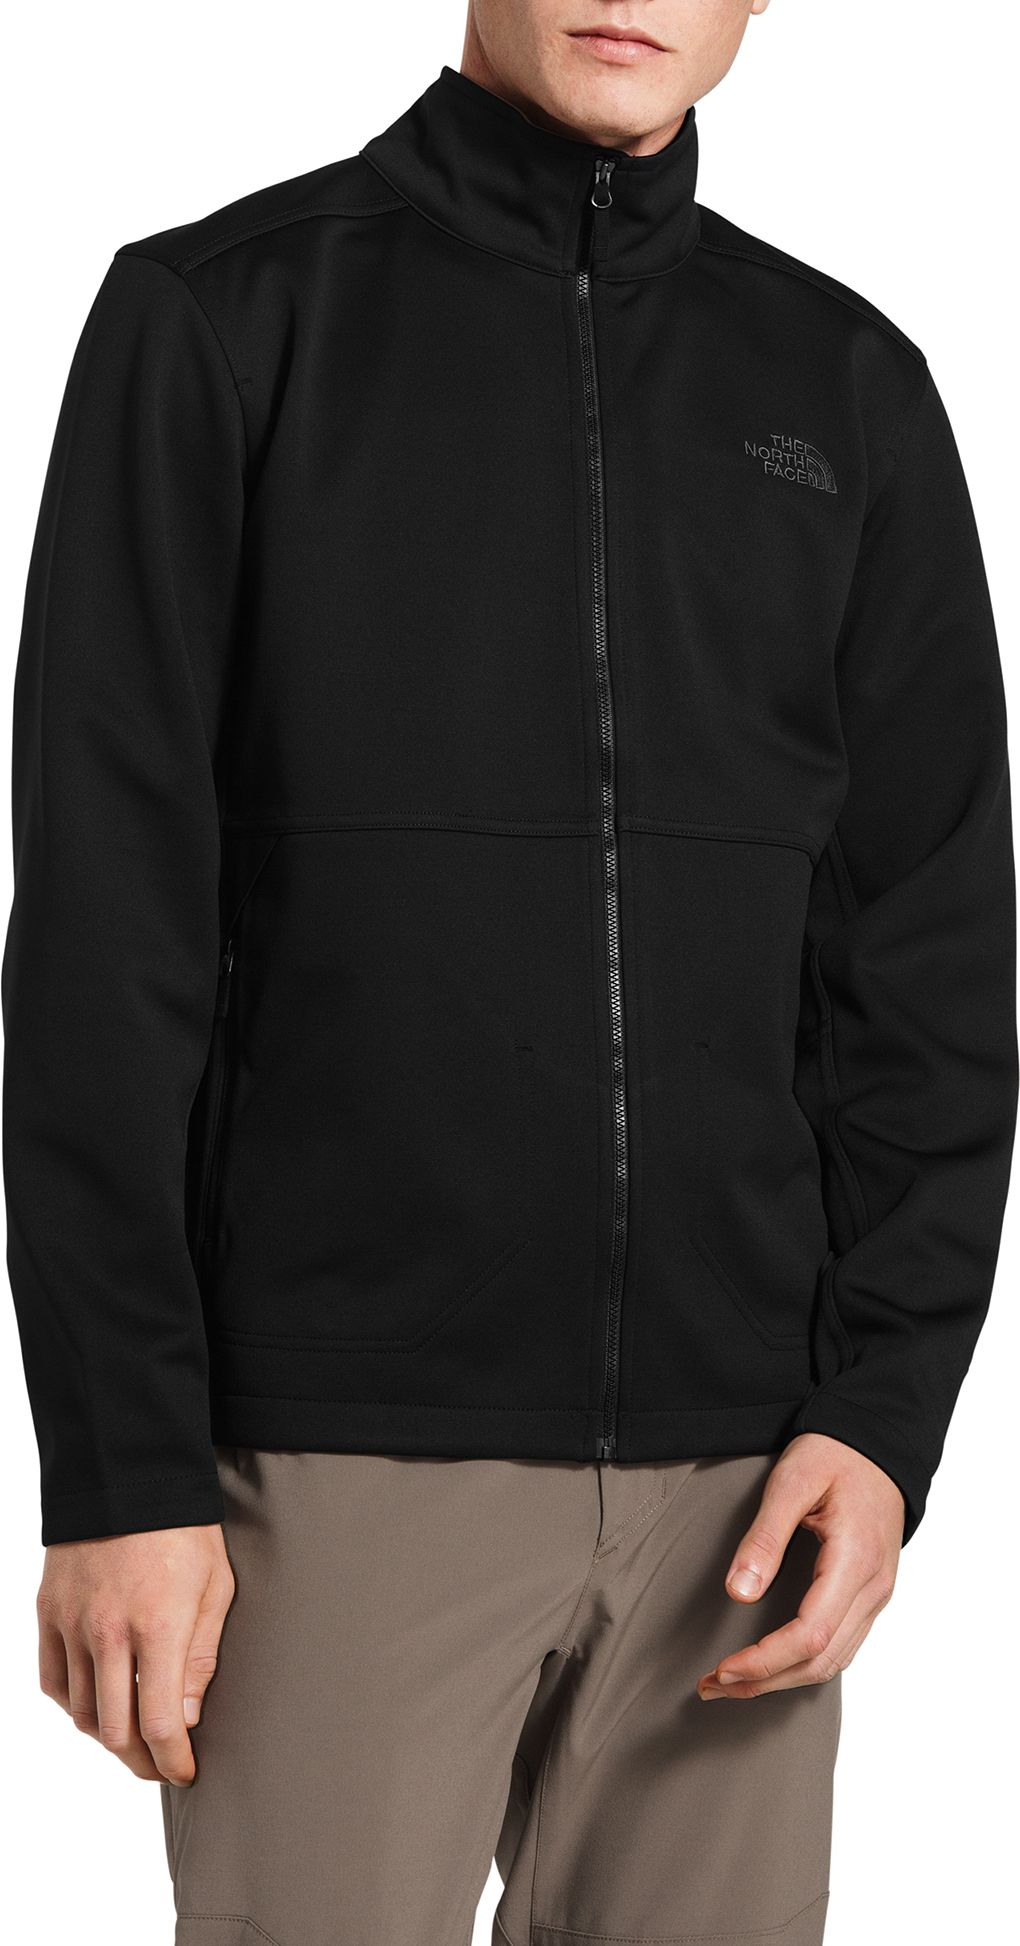 north face men's apex canyonwall jacket